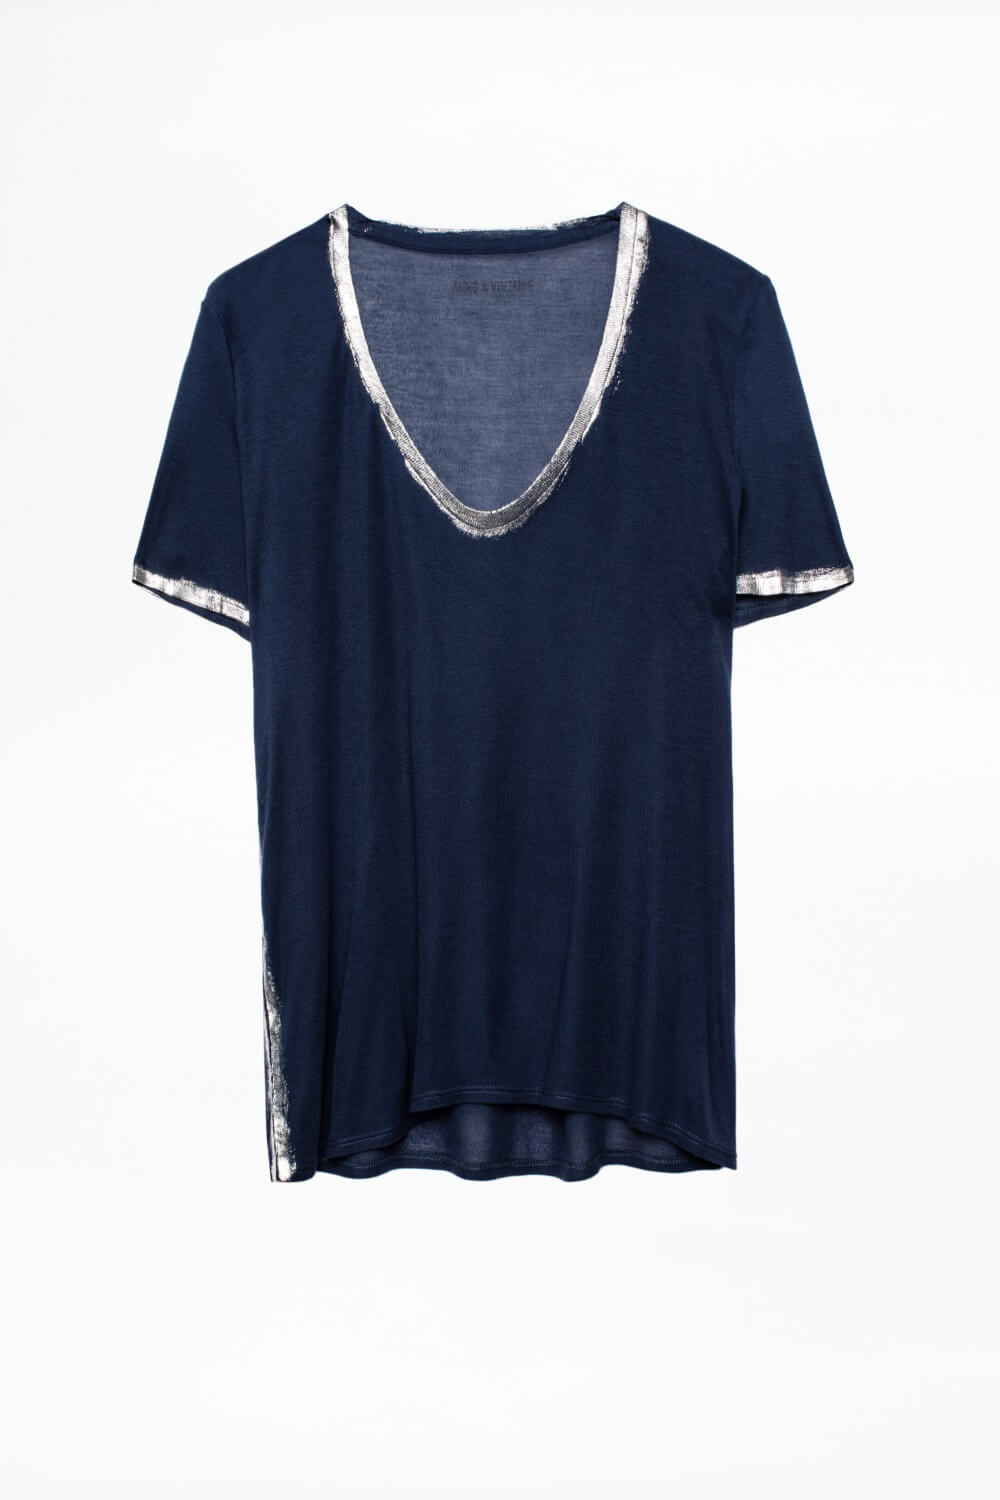 ZADIG&VOLTAIRE T-SHIRT-Libas Trendy Fashion Store